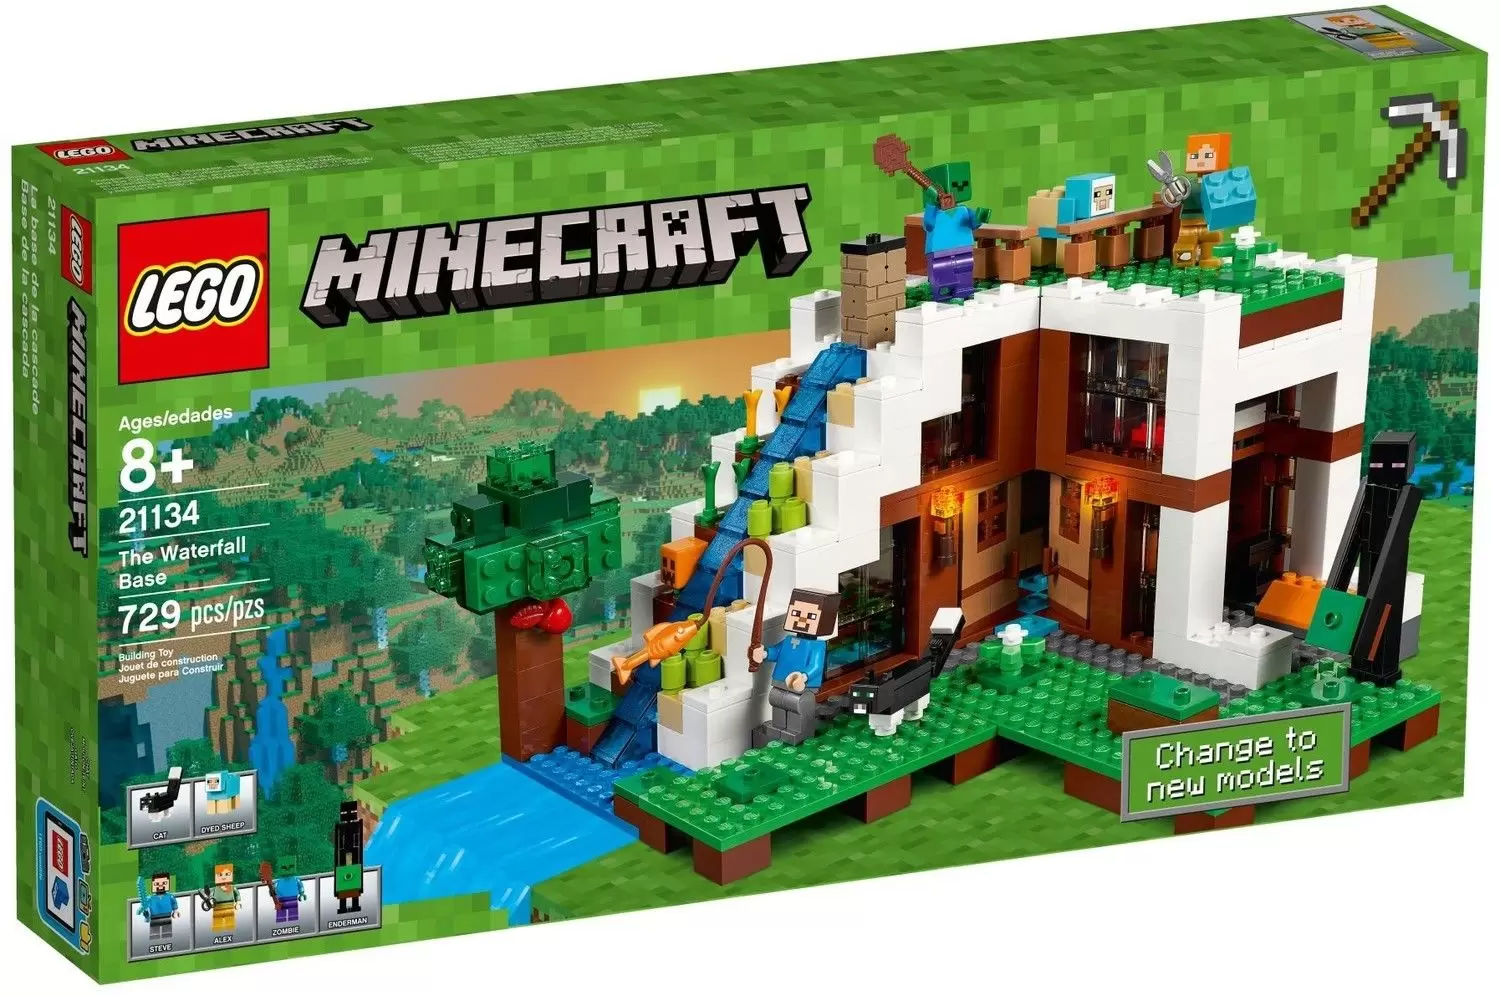 LEGO Minecraft - The Waterfall Base